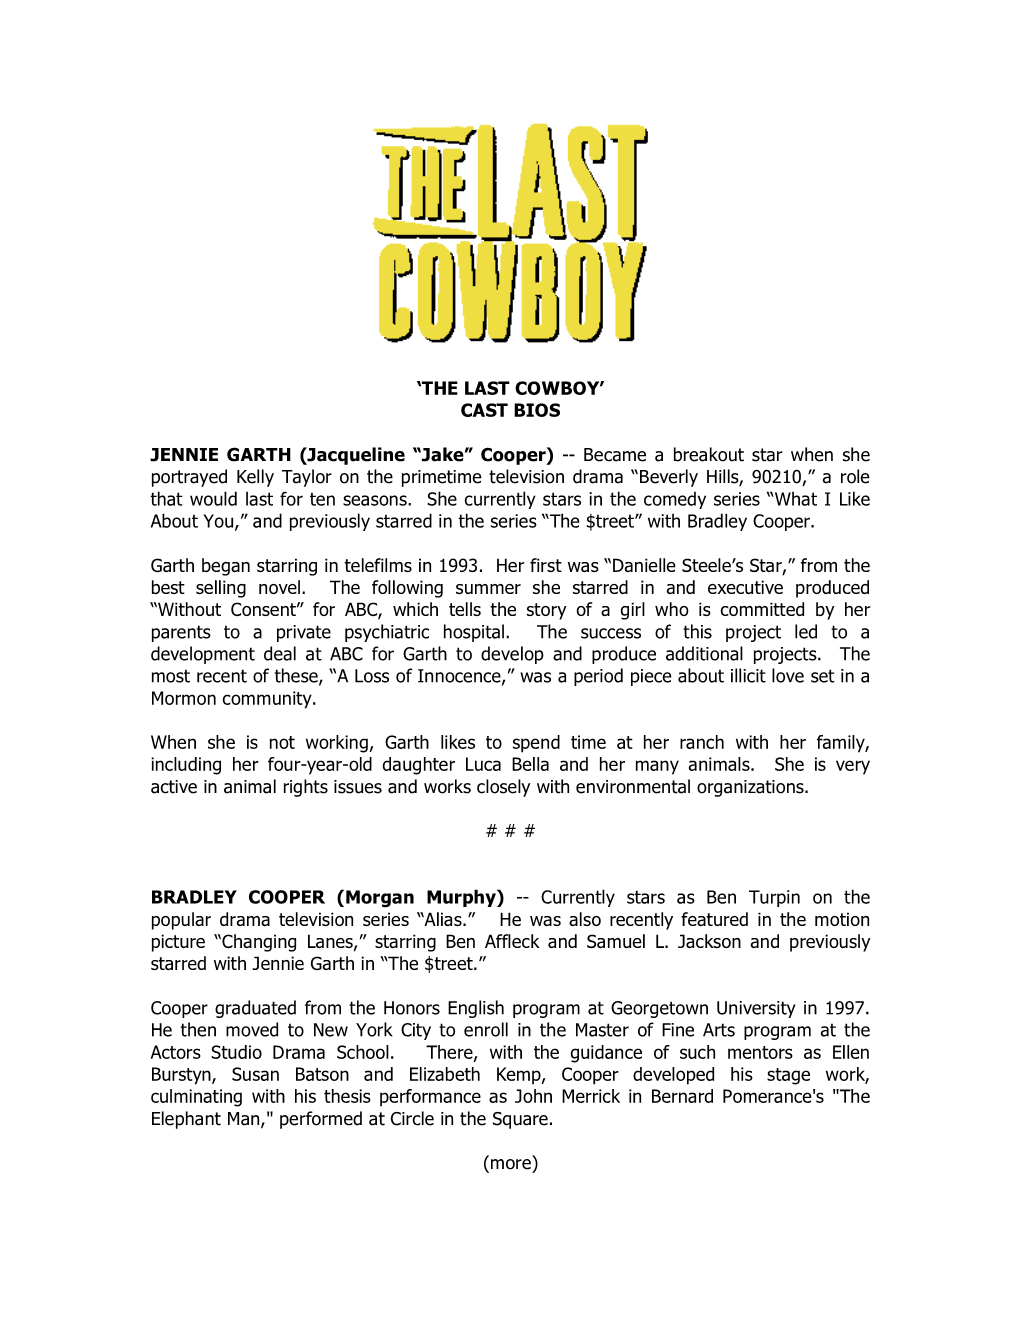 'THE LAST COWBOY' CAST BIOS JENNIE GARTH (Jacqueline “Jake” Cooper) -- Became a Breakout Star When She Portrayed Kelly T